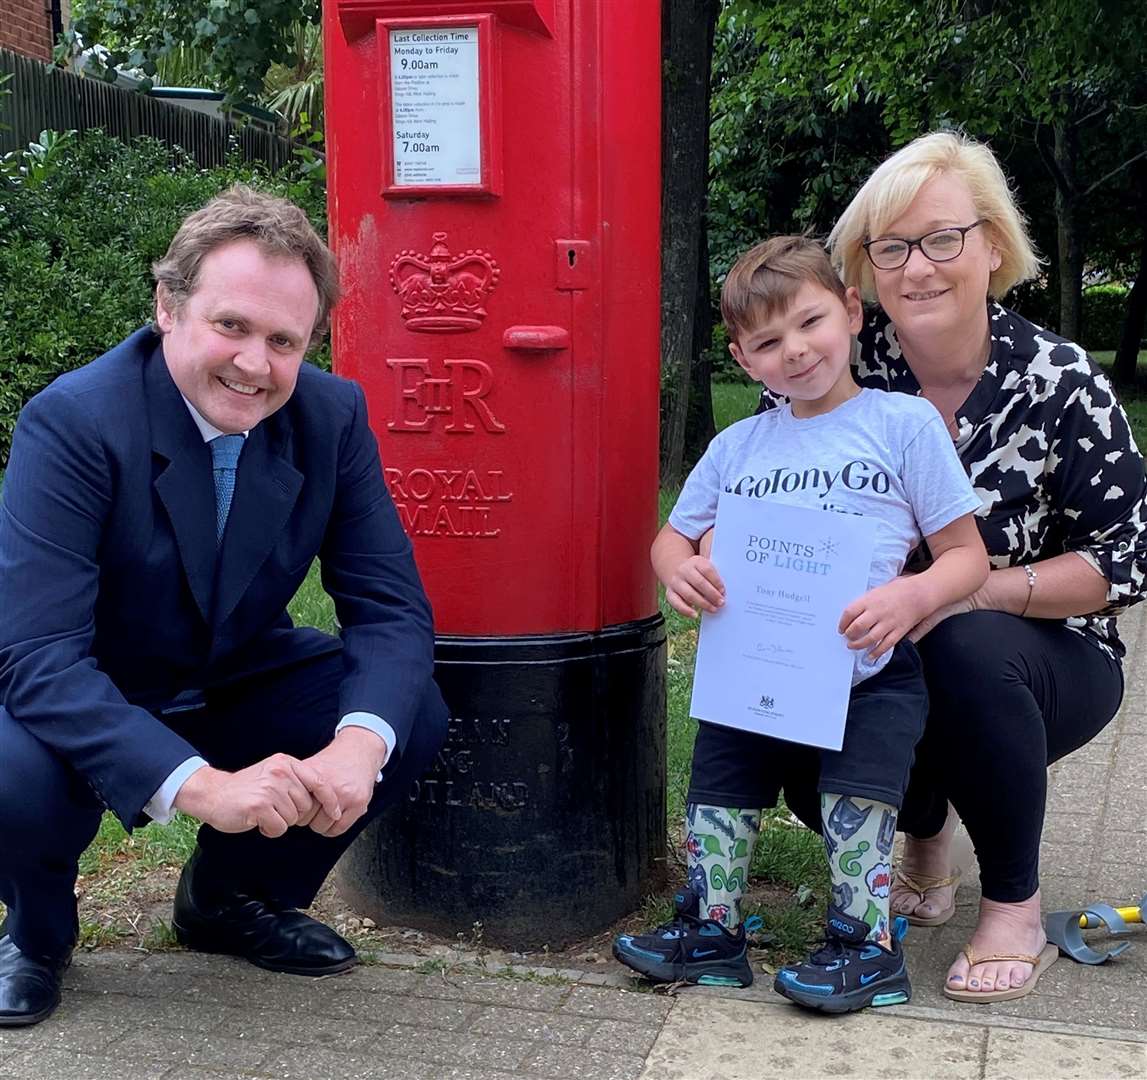 MP Tom Tugendhat presents Tony, pictured with his mum, with a reward from the Prime Minister